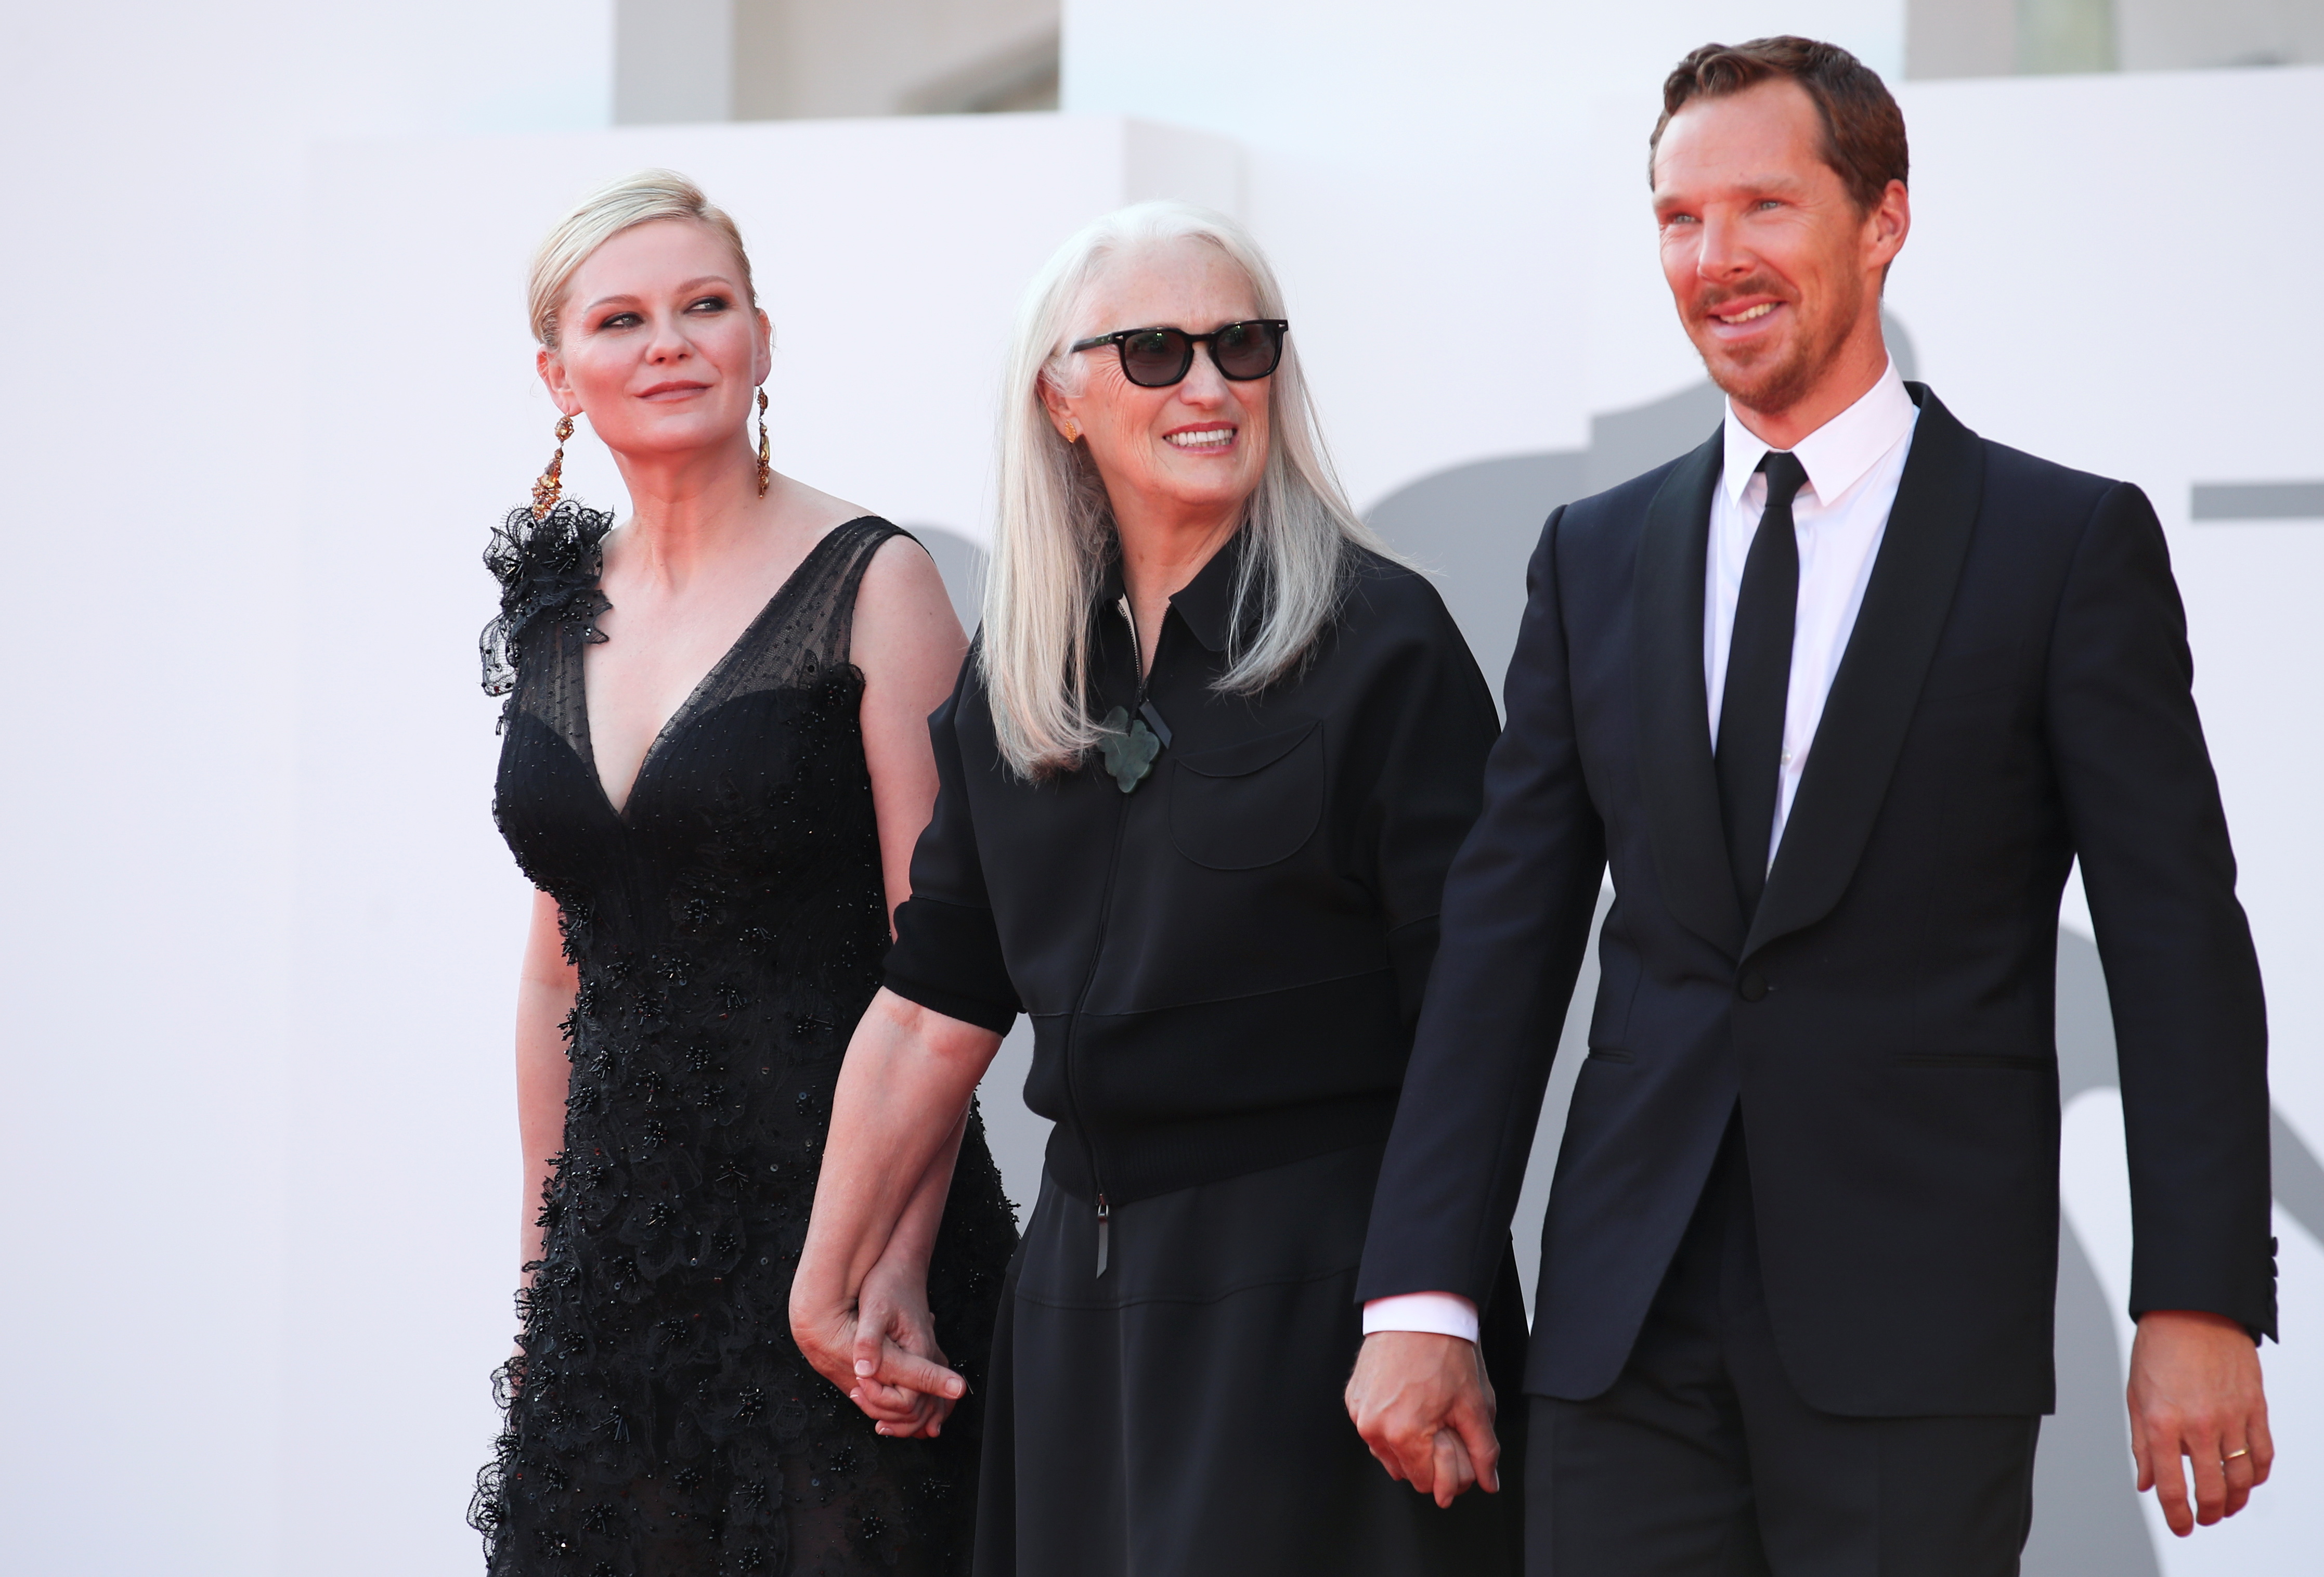 The 78th Venice Film Festival - Screening of the film 'The Power of the Dog' in competition - Red Carpet Arrivals - Venice, Italy September 2, 2021 - Actor Kirsten Dunst, director Jane Campion and actor Benedict Cumberbatch pose. REUTERS/Yara Nardi